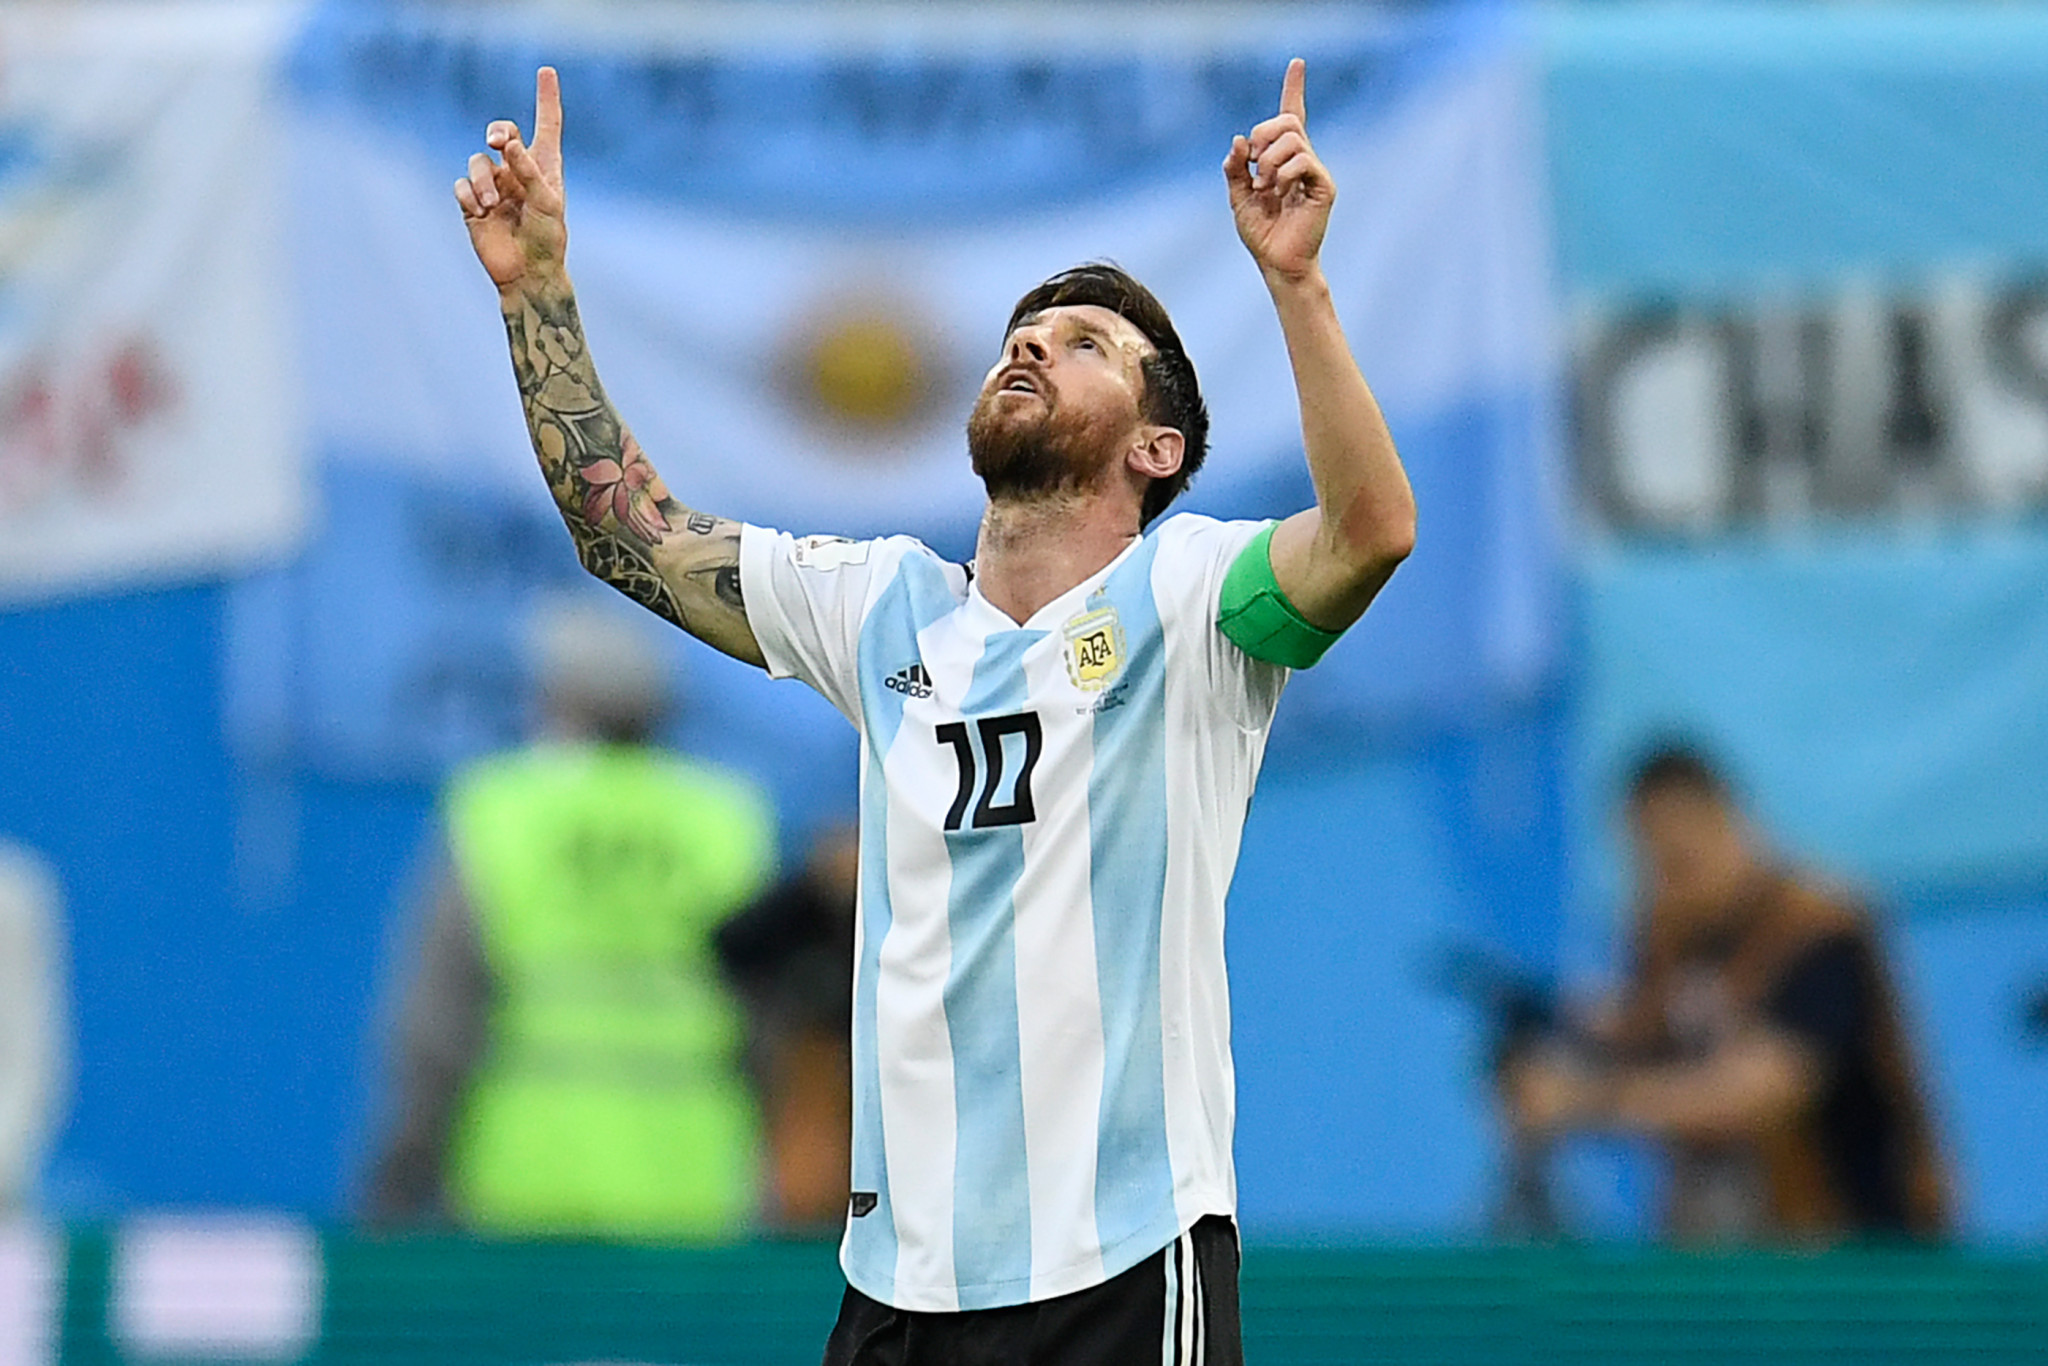 Argentina's Lionel Messi scored his first goal of the 2018 FIFA World Cup ©Getty Images